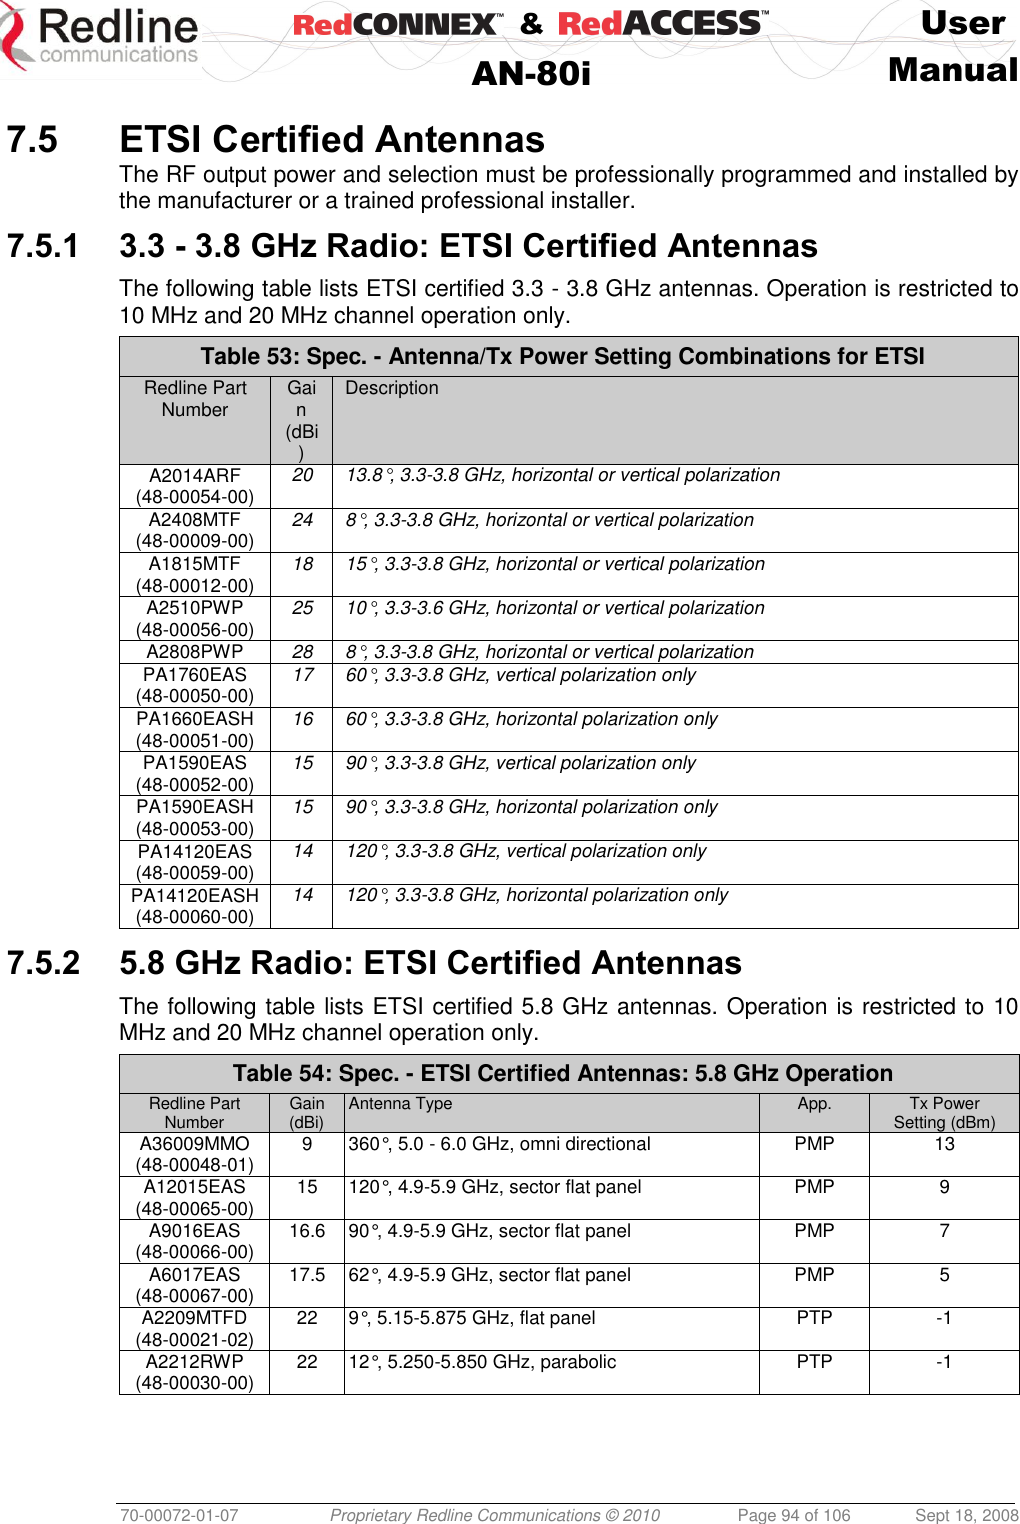    &amp;  User  AN-80i Manual  70-00072-01-07 Proprietary Redline Communications © 2010  Page 94 of 106  Sept 18, 2008  7.5 ETSI Certified Antennas The RF output power and selection must be professionally programmed and installed by the manufacturer or a trained professional installer. 7.5.1 3.3 - 3.8 GHz Radio: ETSI Certified Antennas  The following table lists ETSI certified 3.3 - 3.8 GHz antennas. Operation is restricted to 10 MHz and 20 MHz channel operation only. Table 53: Spec. - Antenna/Tx Power Setting Combinations for ETSI Redline Part Number Gain (dBi) Description A2014ARF (48-00054-00) 20 13.8°, 3.3-3.8 GHz, horizontal or vertical polarization A2408MTF (48-00009-00) 24 8°, 3.3-3.8 GHz, horizontal or vertical polarization A1815MTF (48-00012-00) 18 15°, 3.3-3.8 GHz, horizontal or vertical polarization A2510PWP (48-00056-00) 25 10°, 3.3-3.6 GHz, horizontal or vertical polarization A2808PWP 28 8°, 3.3-3.8 GHz, horizontal or vertical polarization PA1760EAS (48-00050-00) 17 60°, 3.3-3.8 GHz, vertical polarization only PA1660EASH (48-00051-00) 16 60°, 3.3-3.8 GHz, horizontal polarization only PA1590EAS (48-00052-00) 15 90°, 3.3-3.8 GHz, vertical polarization only PA1590EASH (48-00053-00) 15 90°, 3.3-3.8 GHz, horizontal polarization only PA14120EAS (48-00059-00) 14 120°, 3.3-3.8 GHz, vertical polarization only PA14120EASH (48-00060-00) 14 120°, 3.3-3.8 GHz, horizontal polarization only  7.5.2 5.8 GHz Radio: ETSI Certified Antennas  The following table lists ETSI certified 5.8 GHz antennas. Operation is restricted to 10 MHz and 20 MHz channel operation only. Table 54: Spec. - ETSI Certified Antennas: 5.8 GHz Operation Redline Part Number Gain (dBi) Antenna Type App. Tx Power Setting (dBm) A36009MMO  (48-00048-01) 9 360°, 5.0 - 6.0 GHz, omni directional PMP 13 A12015EAS  (48-00065-00) 15 120°, 4.9-5.9 GHz, sector flat panel PMP 9 A9016EAS (48-00066-00) 16.6 90°, 4.9-5.9 GHz, sector flat panel PMP 7 A6017EAS (48-00067-00) 17.5 62°, 4.9-5.9 GHz, sector flat panel PMP 5 A2209MTFD (48-00021-02) 22 9°, 5.15-5.875 GHz, flat panel PTP -1 A2212RWP  (48-00030-00) 22 12°, 5.250-5.850 GHz, parabolic PTP -1  